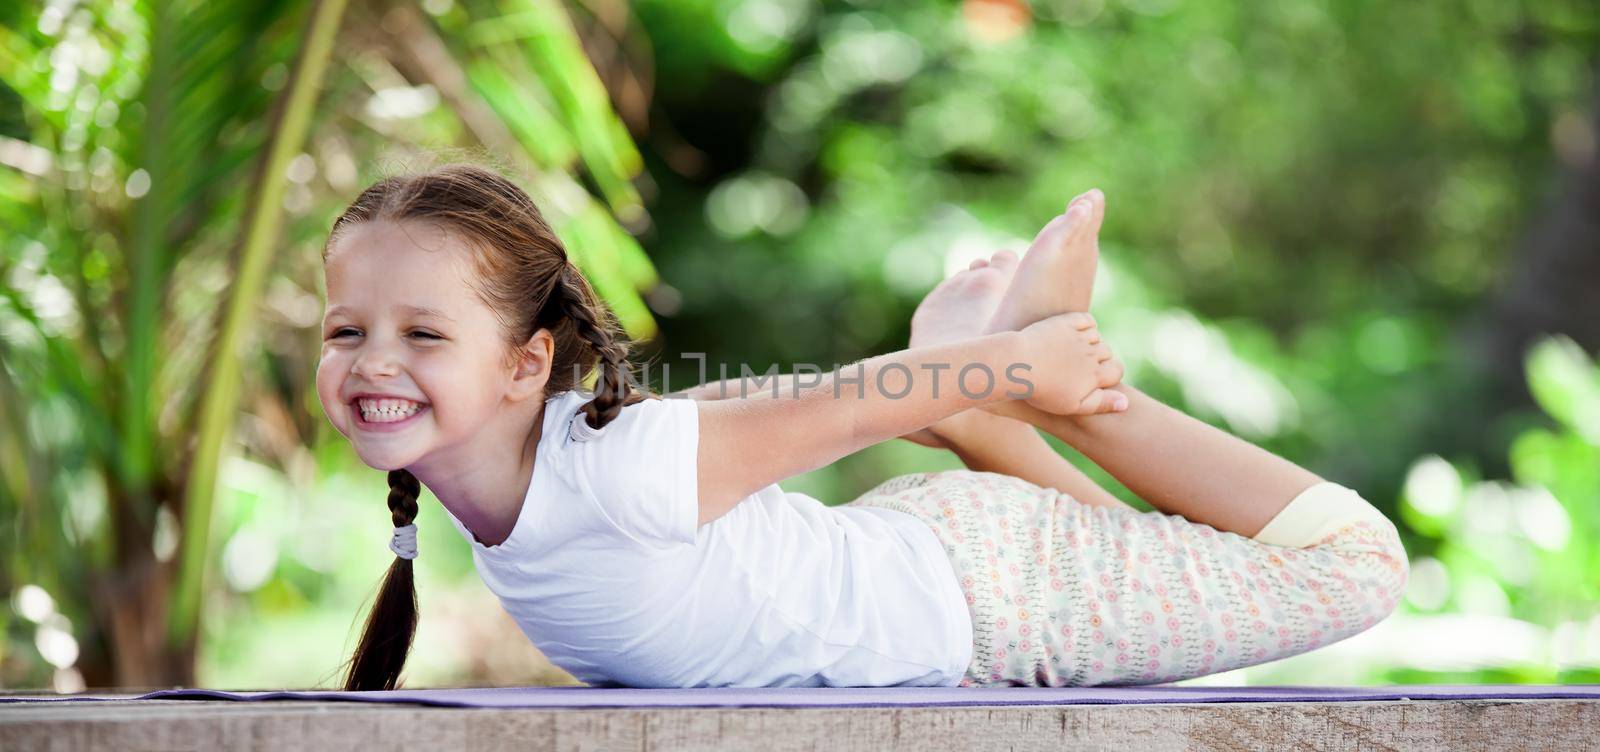 Child doing exercise on platform outdoors. Healthy lifestyle. Yoga girl by Jyliana